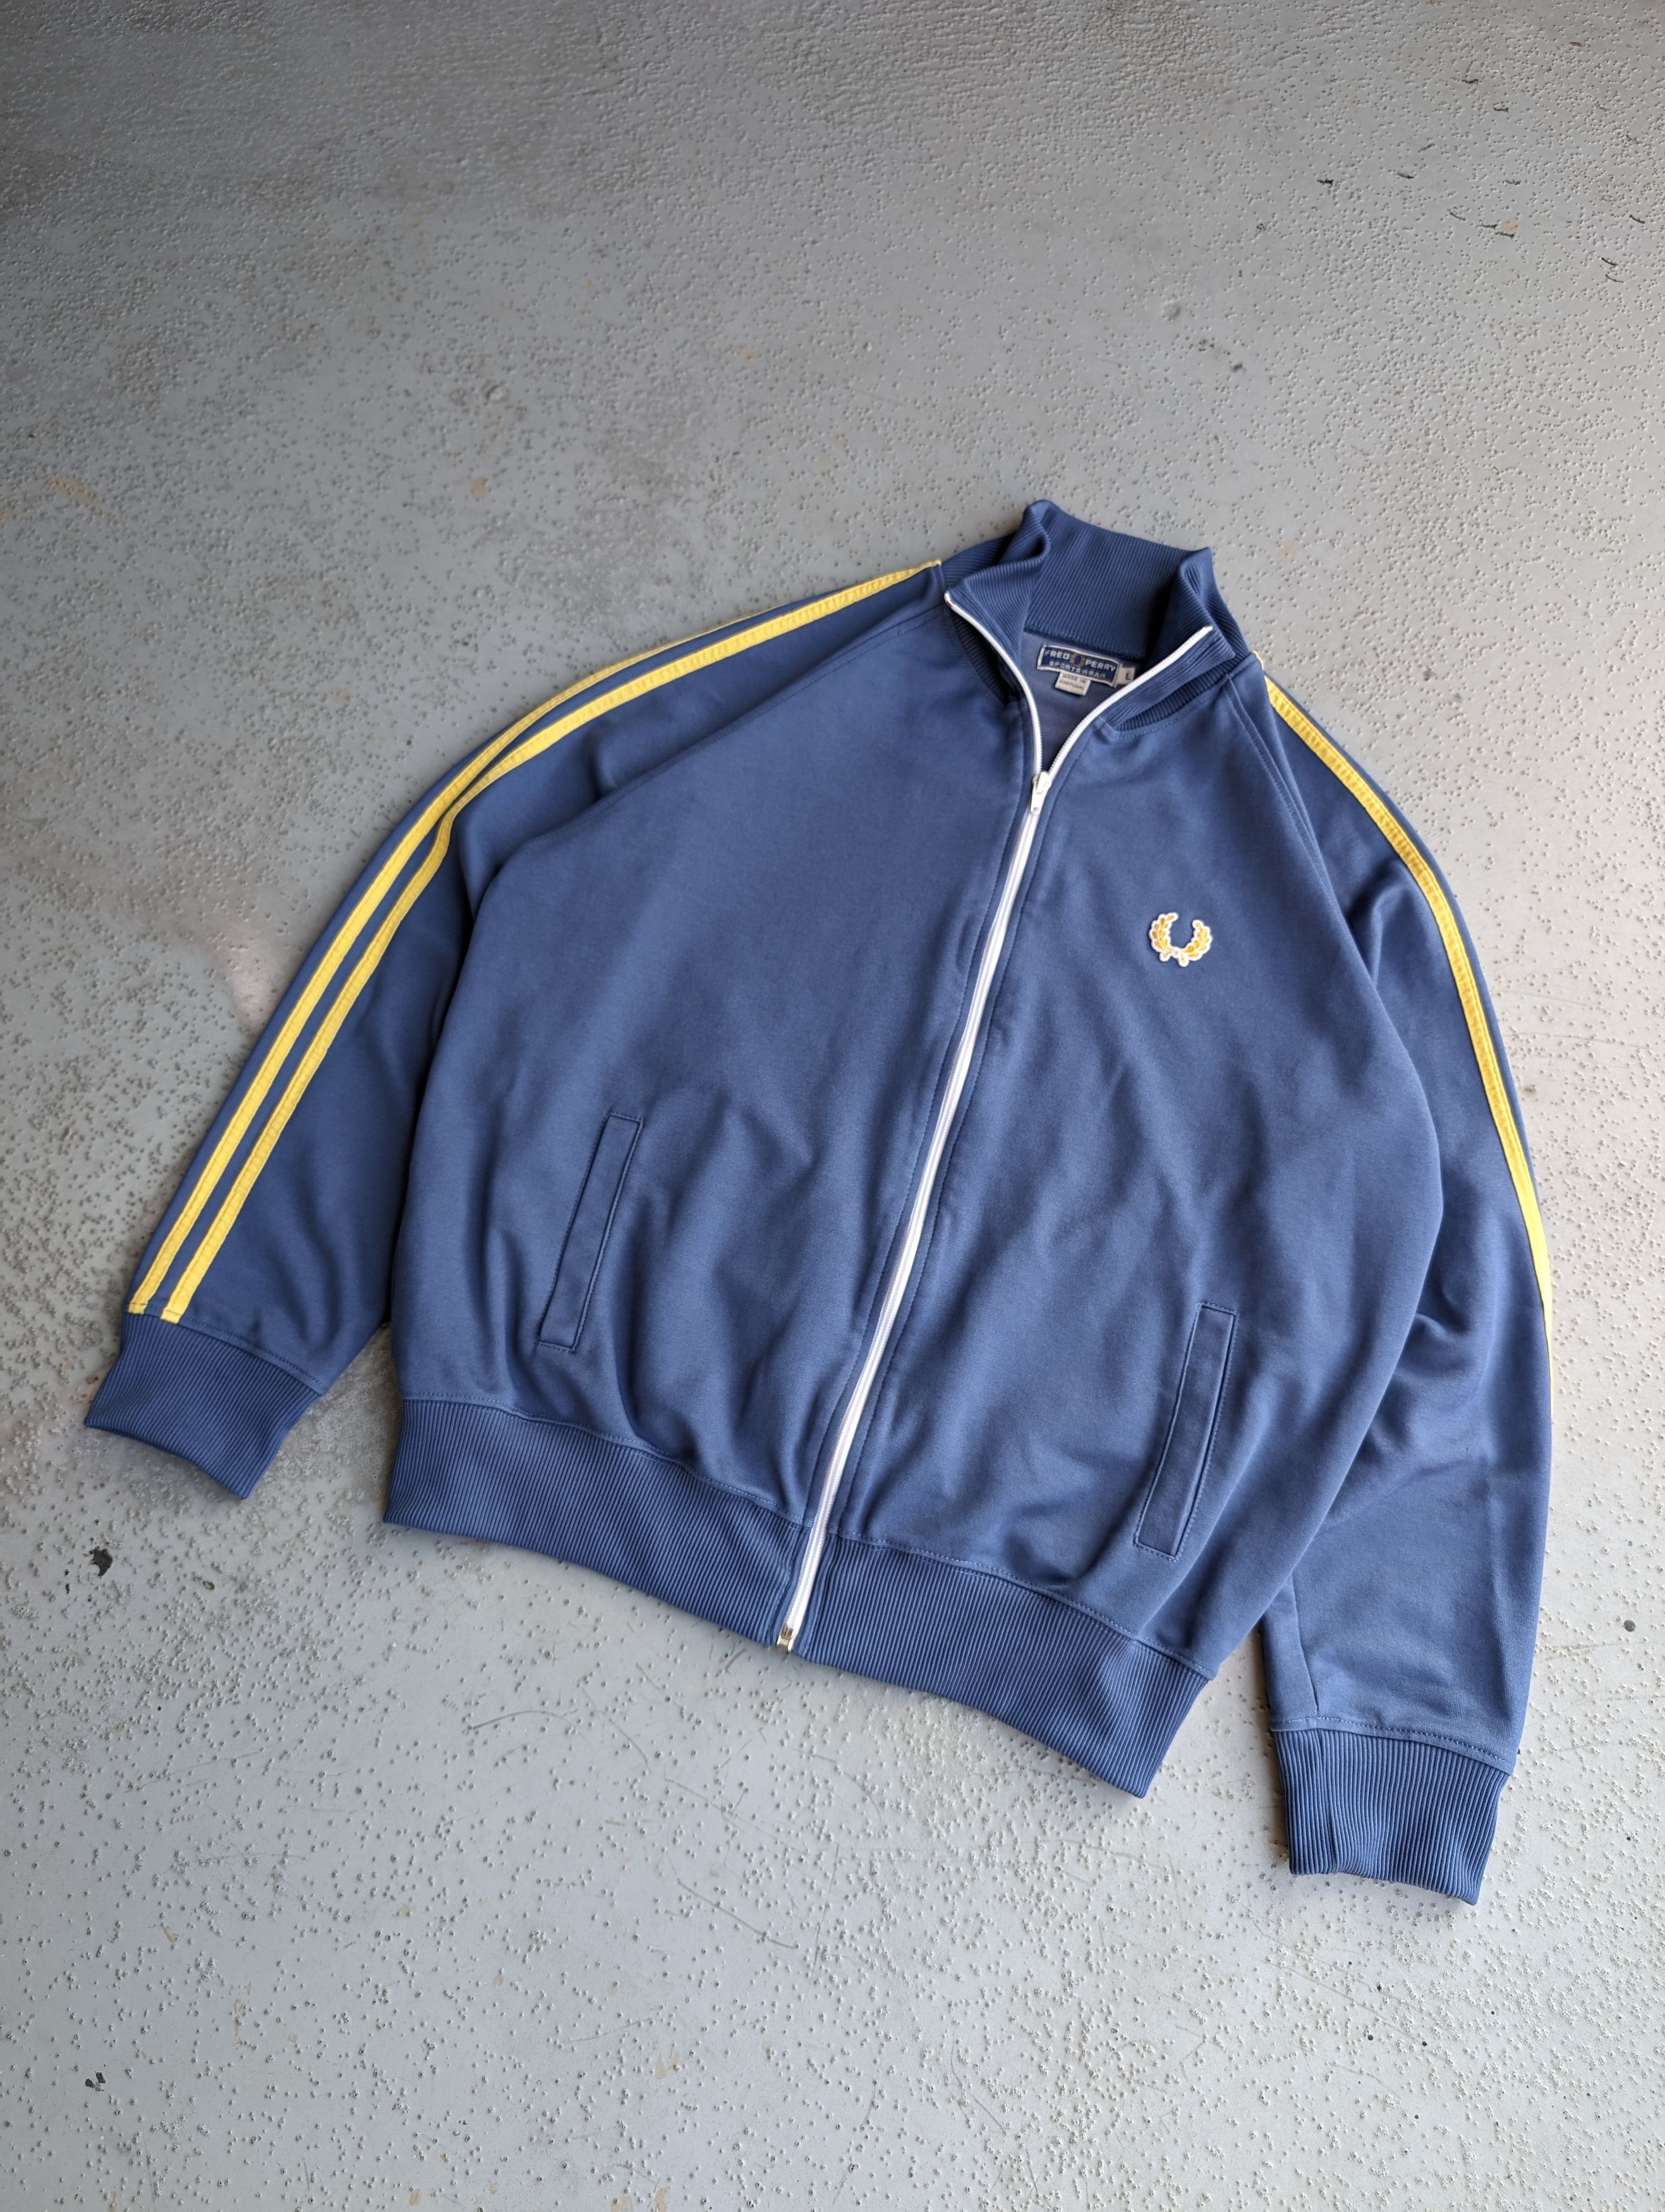 Fred Perry Track Jacket | Grailed